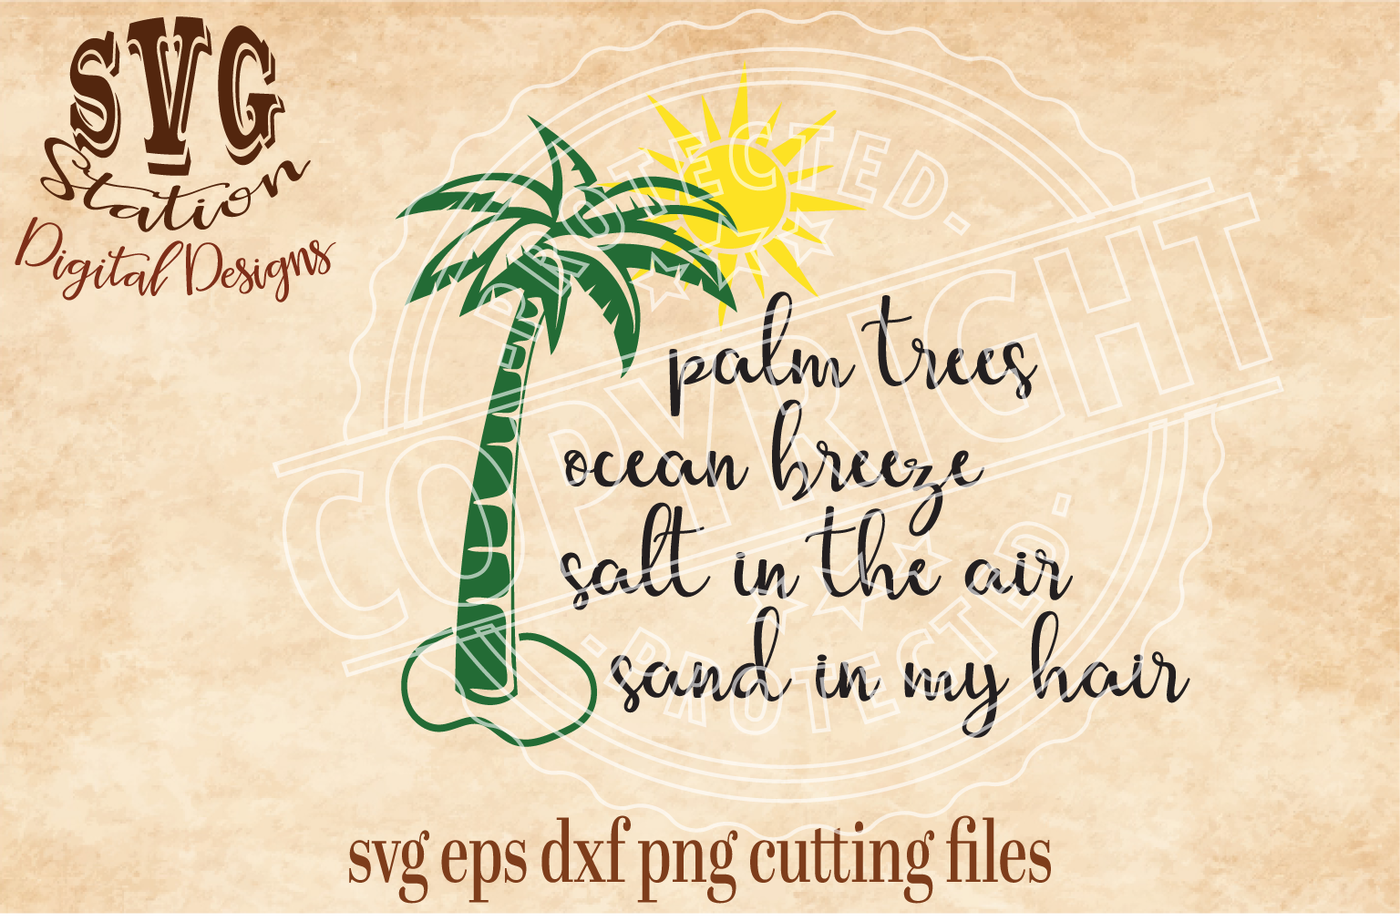 Download Palm Trees Ocean Breeze Svg Dxf Png Eps Cutting File Silhouette Cricut Scal By Svg Station Thehungryjpeg Com